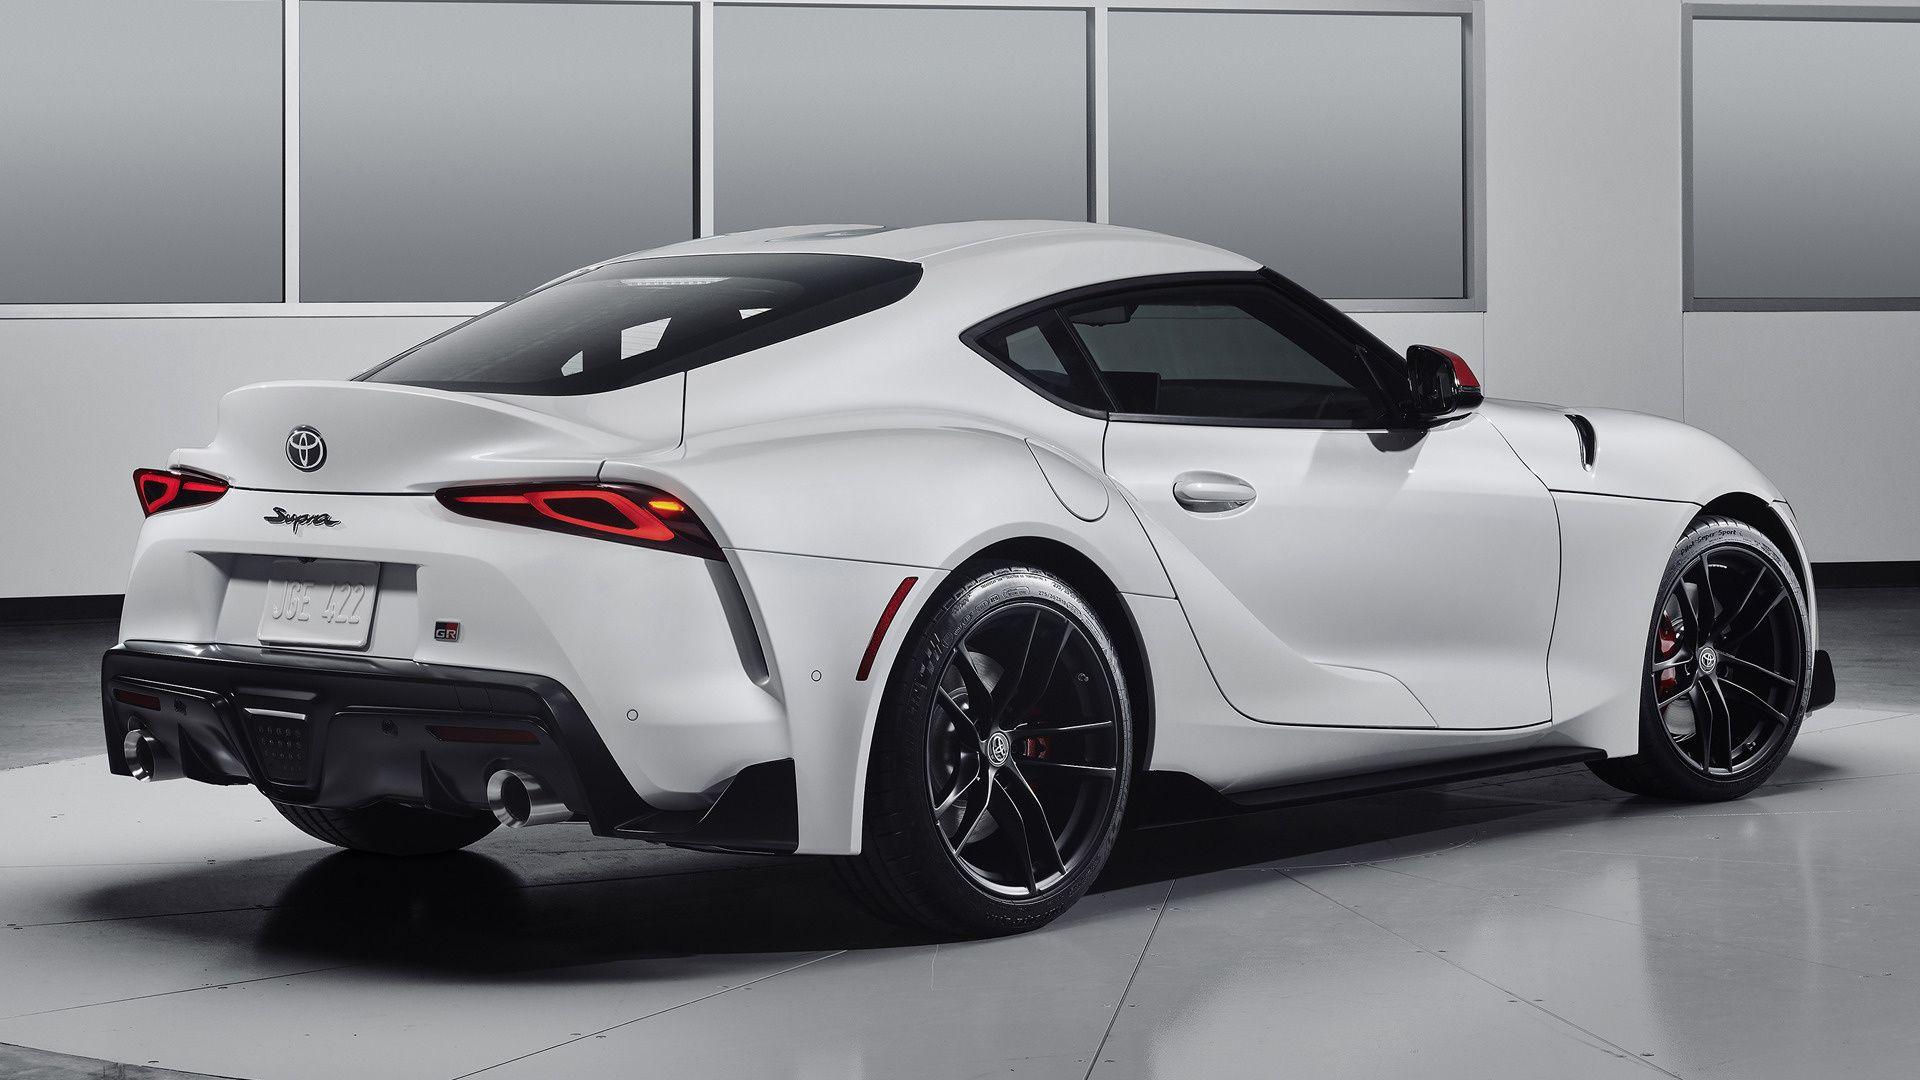 Toyota GR Supra Launch Edition (2020) US Wallpaper and HD Image